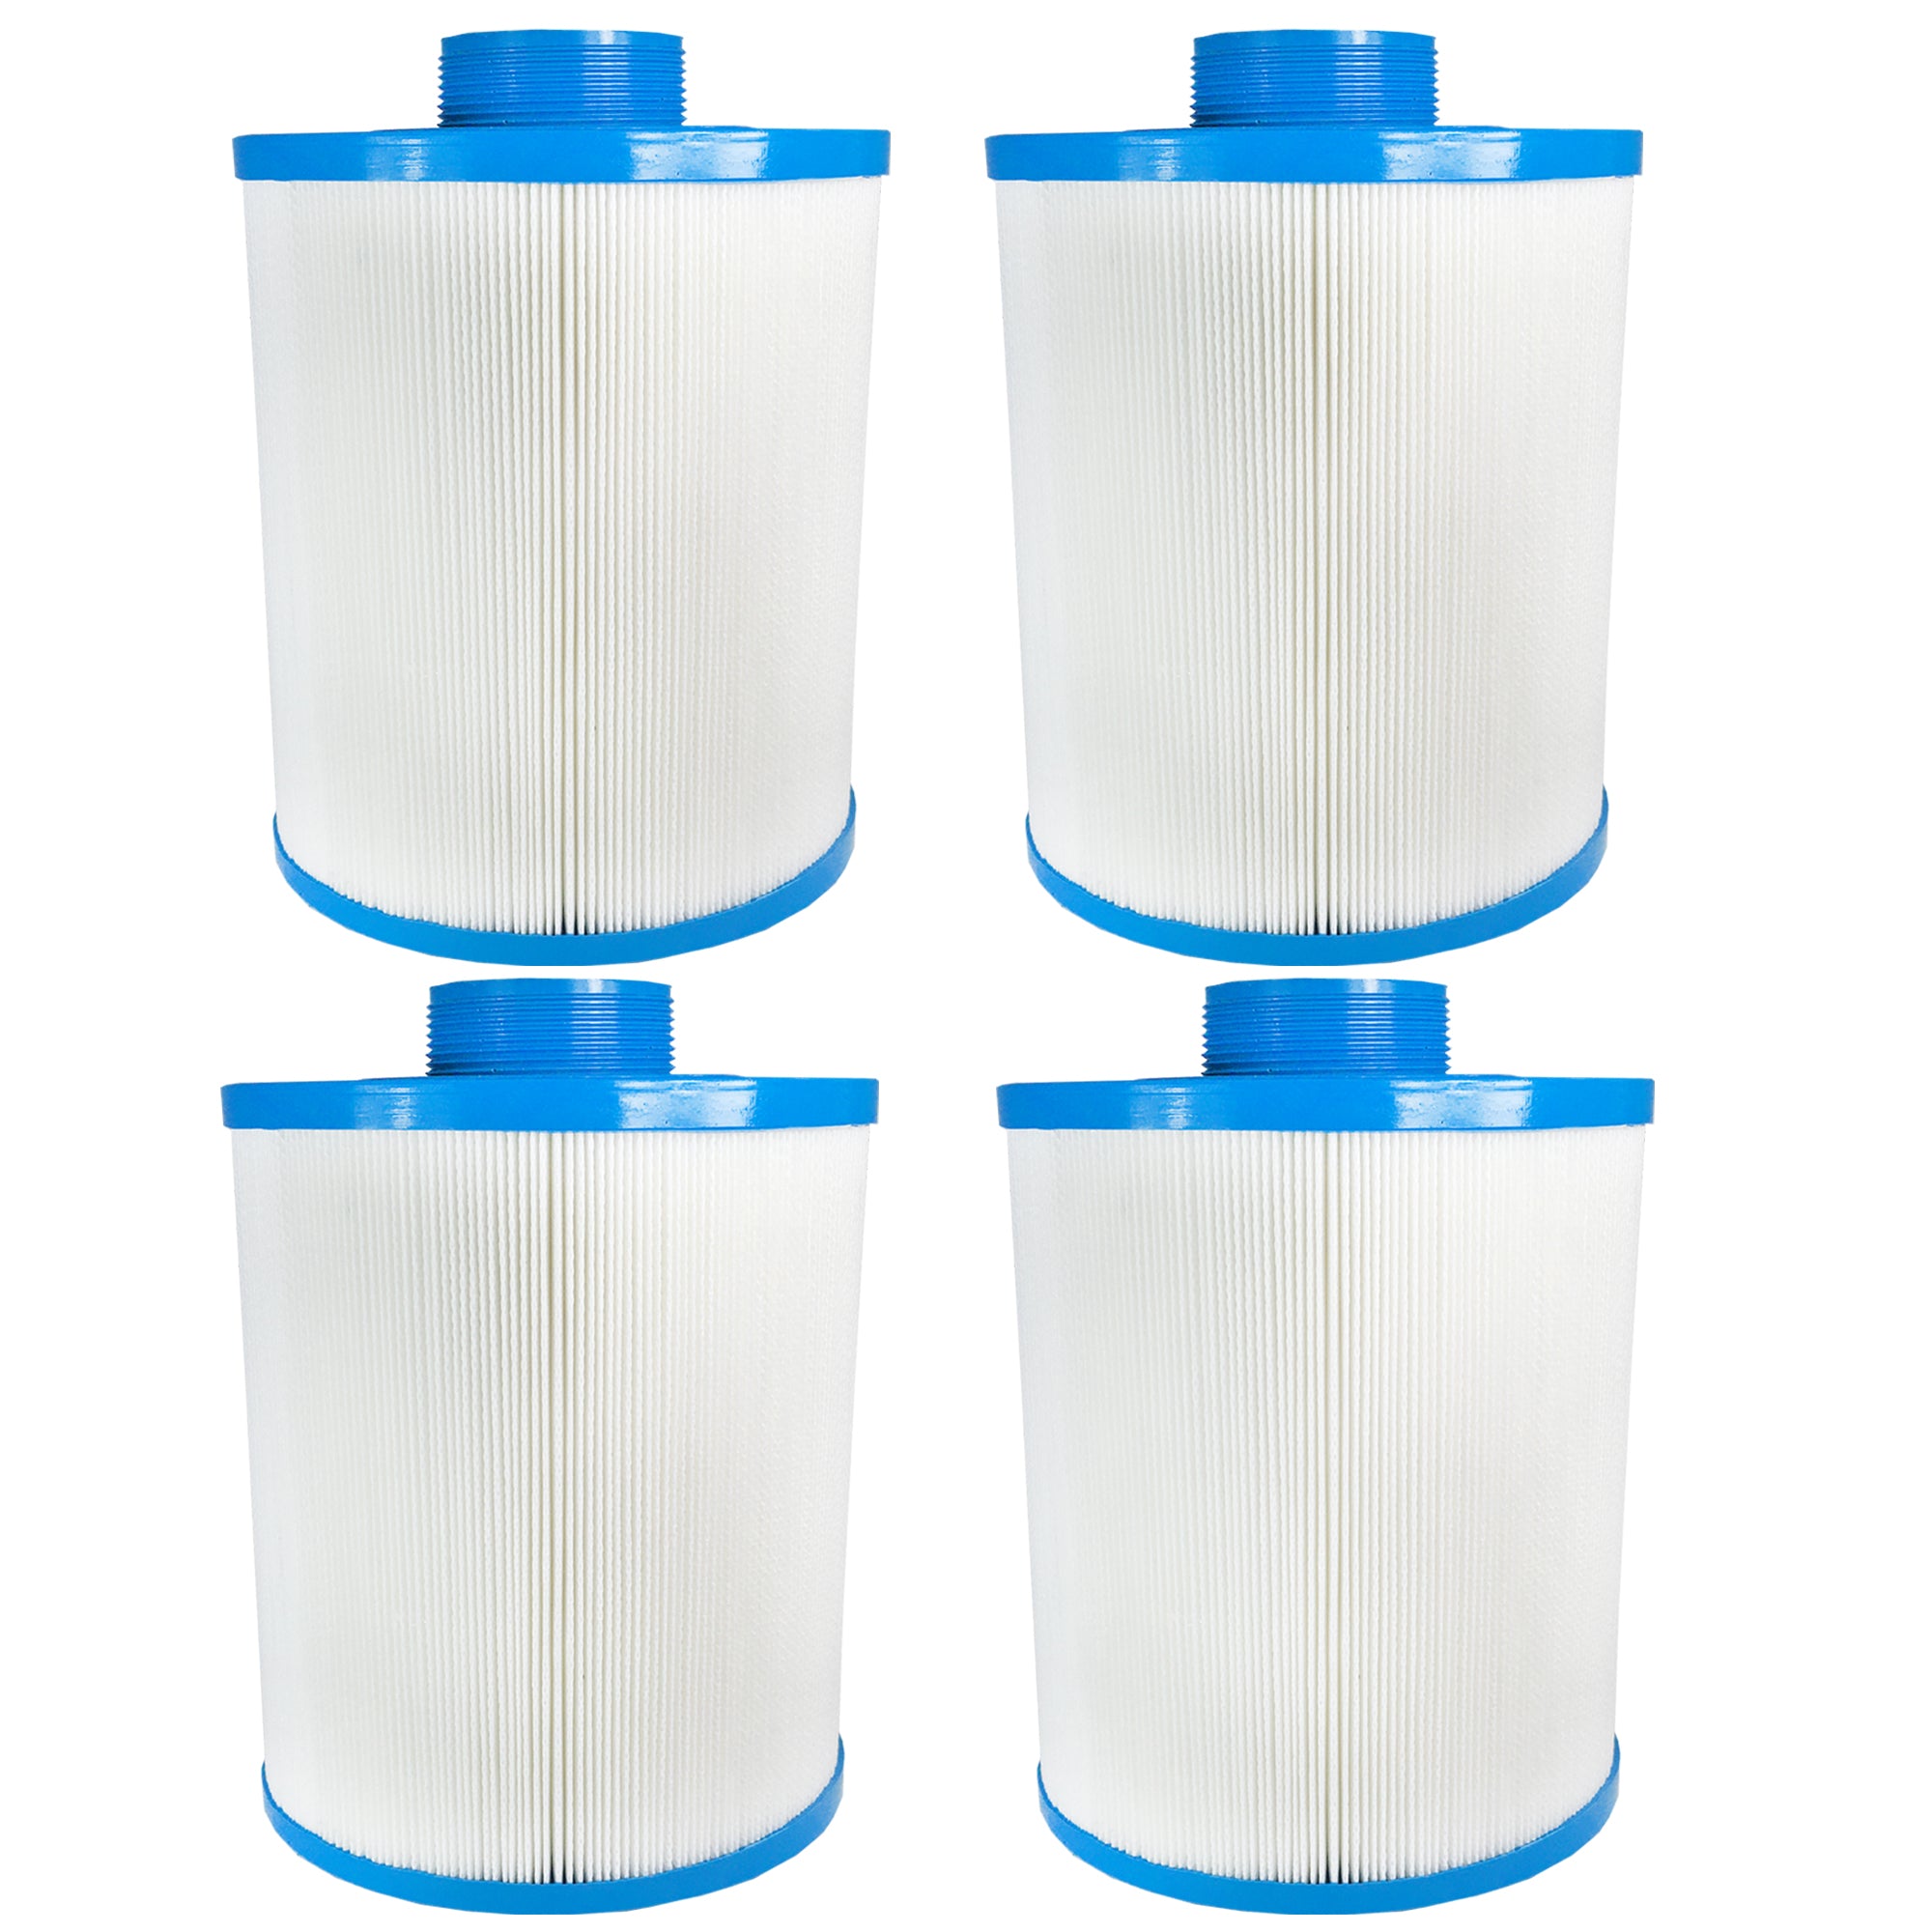 Atomic USA Made Spa Filter for Filbur FC-0312, Pleatco PAS40-F5, Unicel 6CH-352 5-3/8" 9-5/8" Drop in Hot Tub Filter- 4 Pack